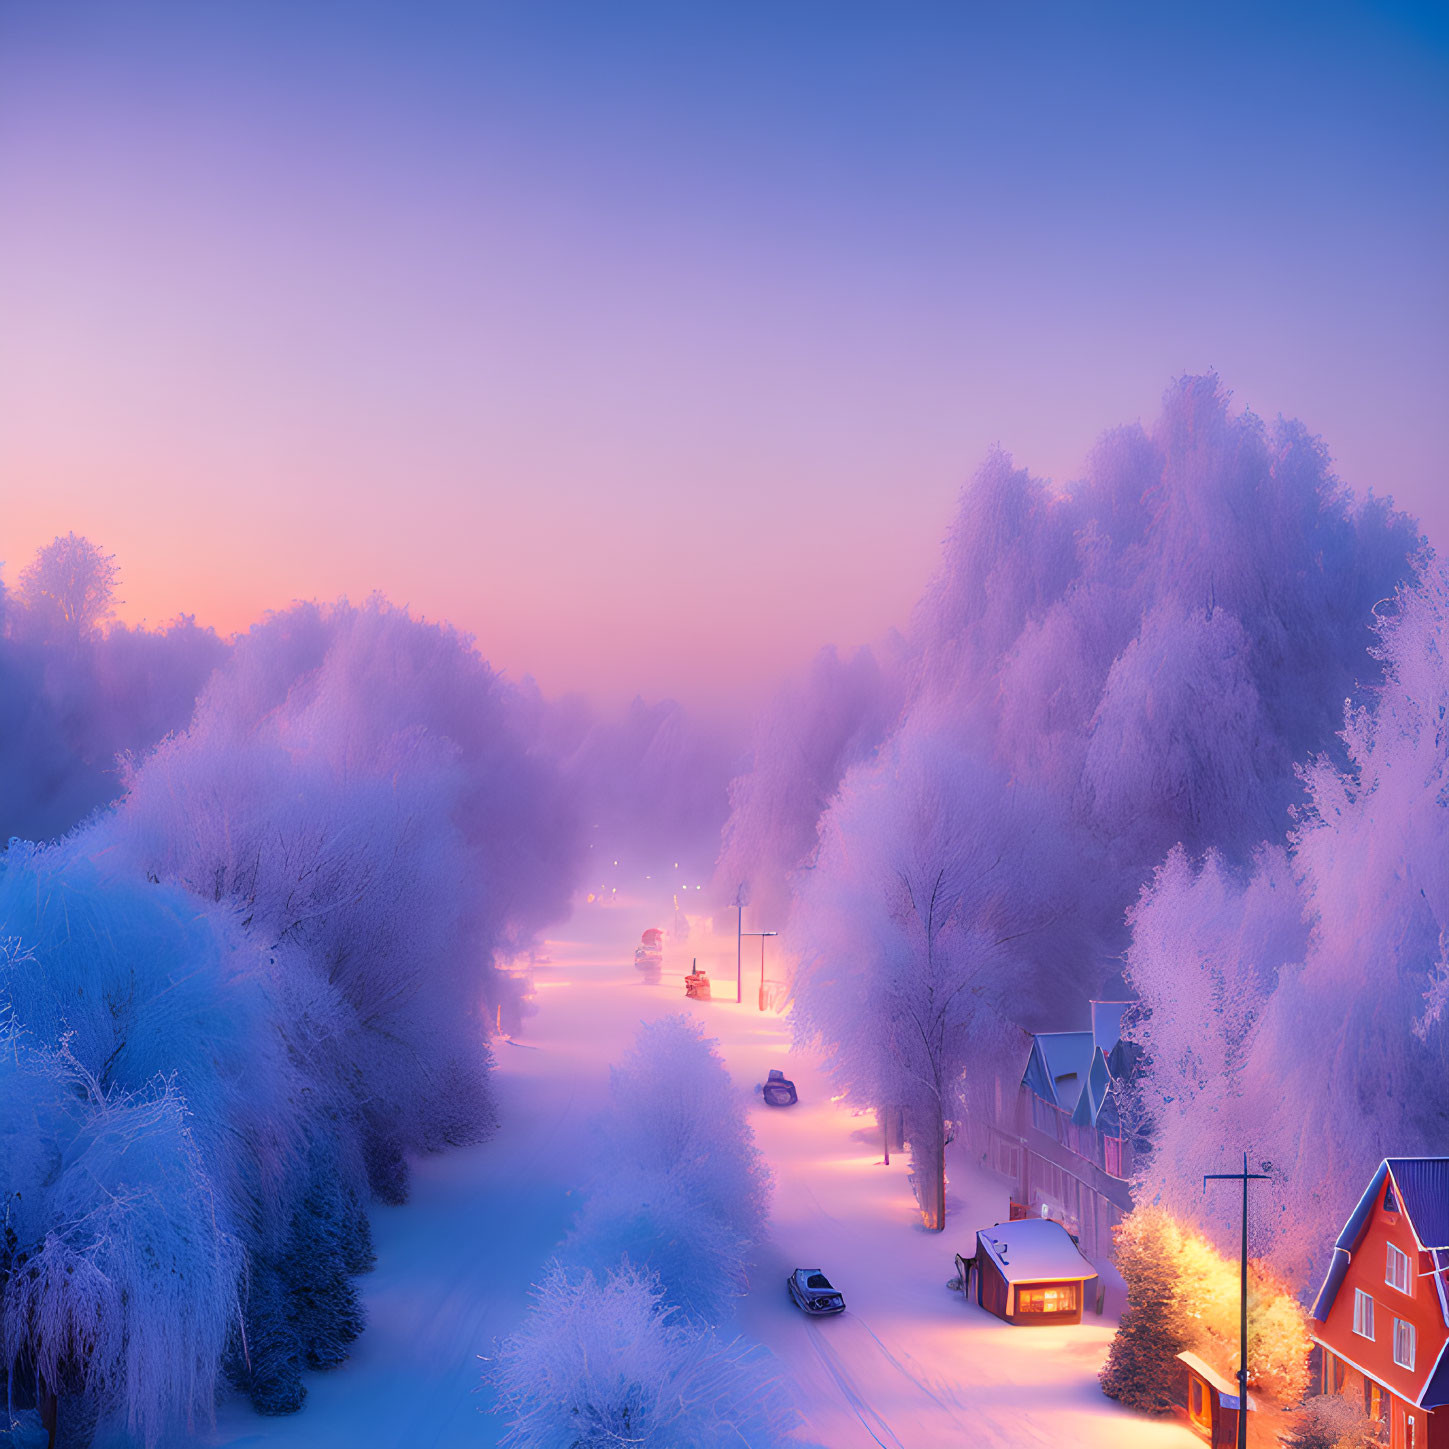 Snow-covered trees and cozy houses in serene winter street scene.